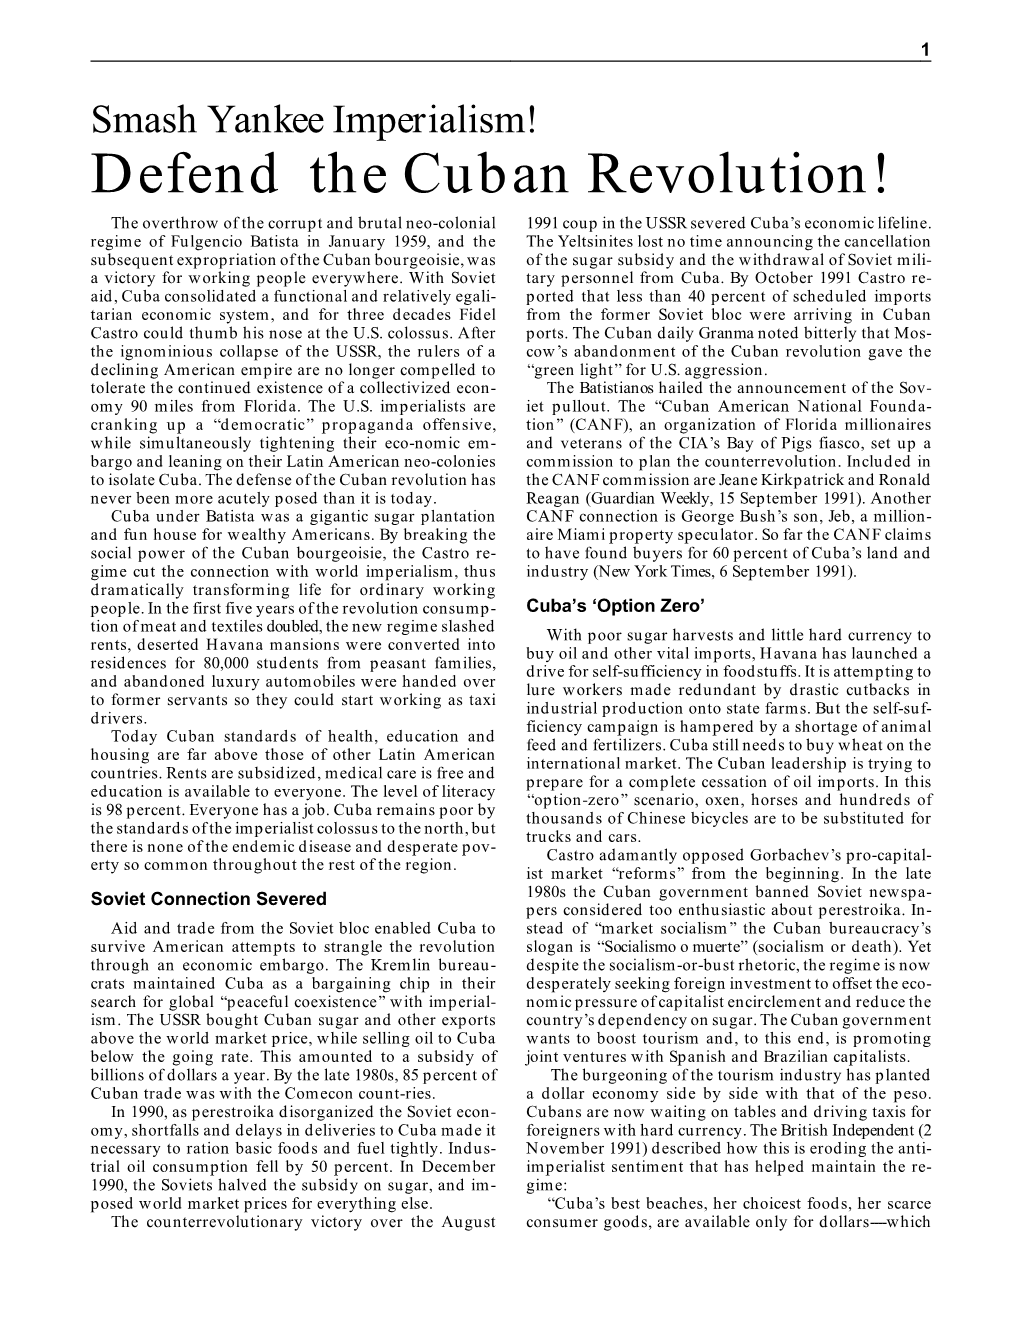 Defend the Cuban Revolution! the Overthrow of the Corrupt and Brutal Neo-Colonial 1991 Coup in the USSR Severed Cuba’S Economic Lifeline